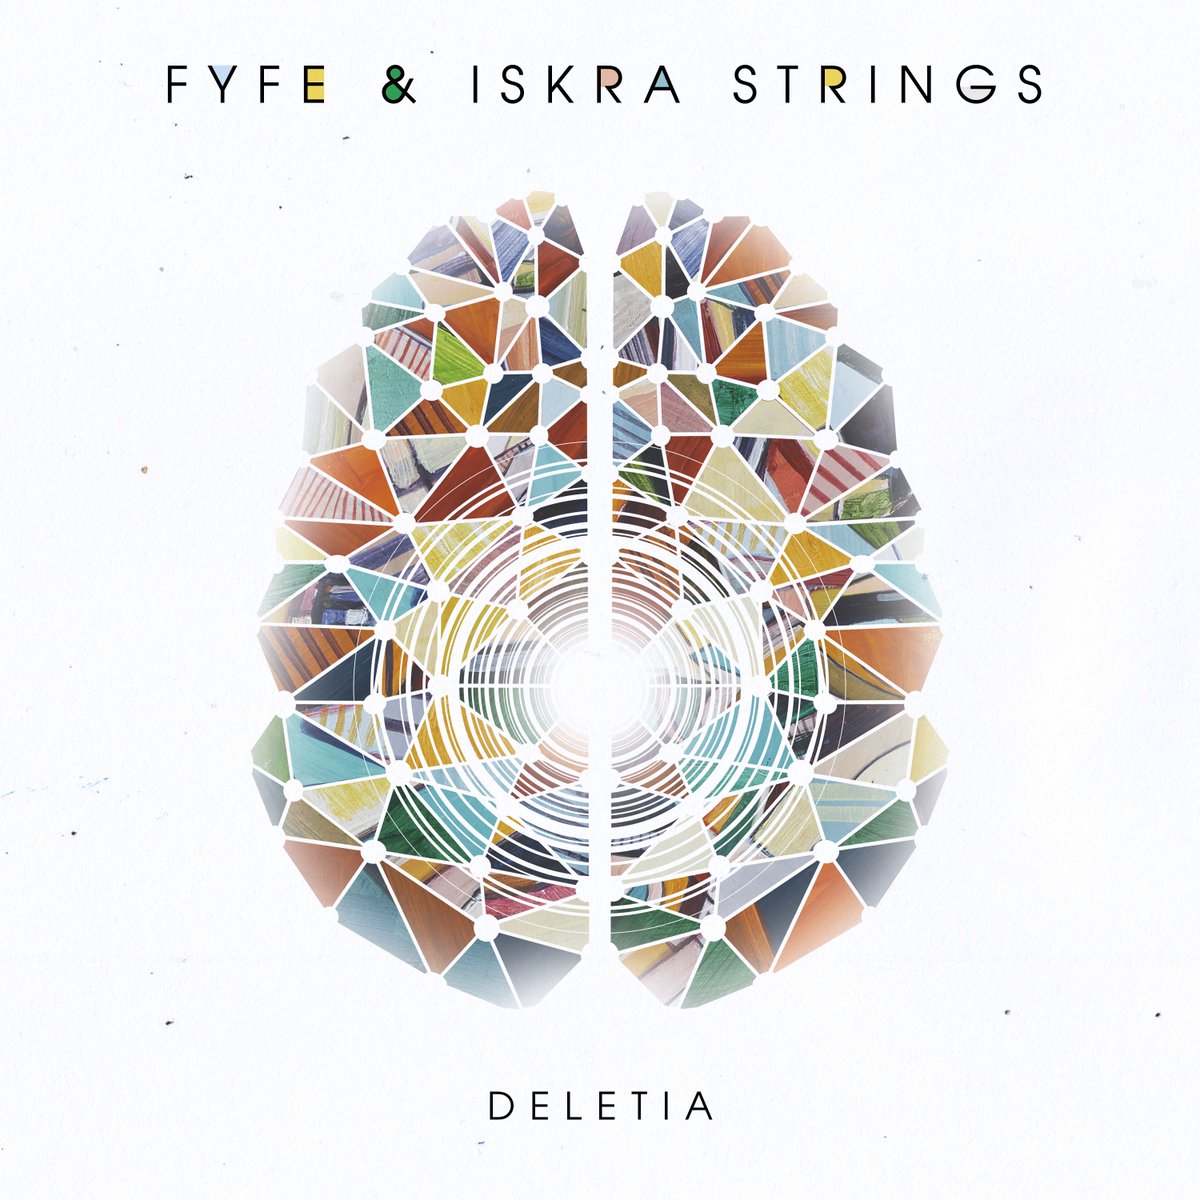 My @thisisfyfe & @iskrastrings 'Deletia' remix is now out. Very happy to let this one finally tumble into the world. Special thank you to @SPAVEN for his incredible drums ➾ open.spotify.com/album/7CsklA3K…